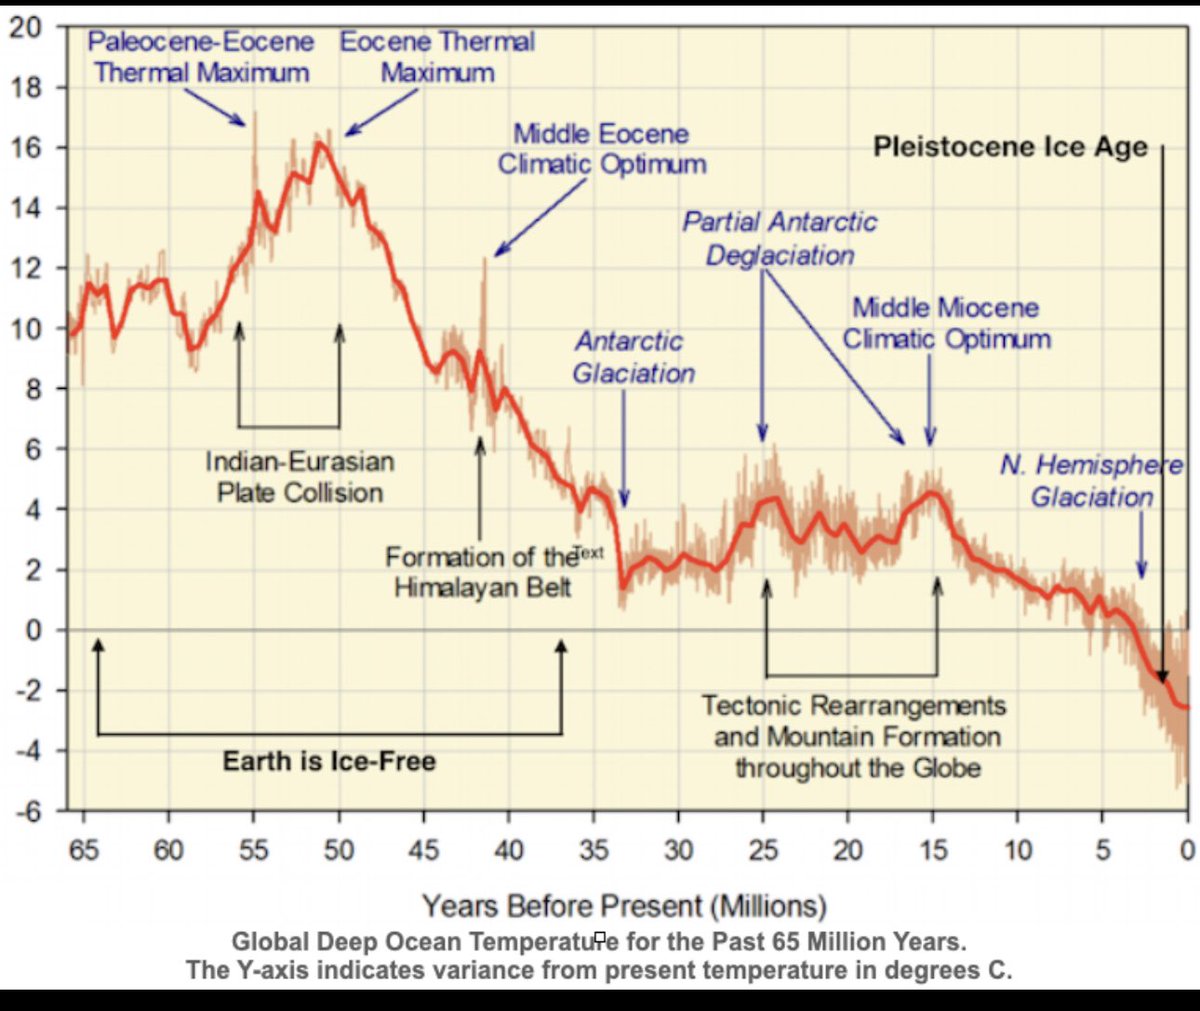 @MikeHudema You lie. The past three interglacial periods were all warmer than this one. And the Eocene Thermal Maximum was by far the warmest in the past 250 million years. You need to study these things.